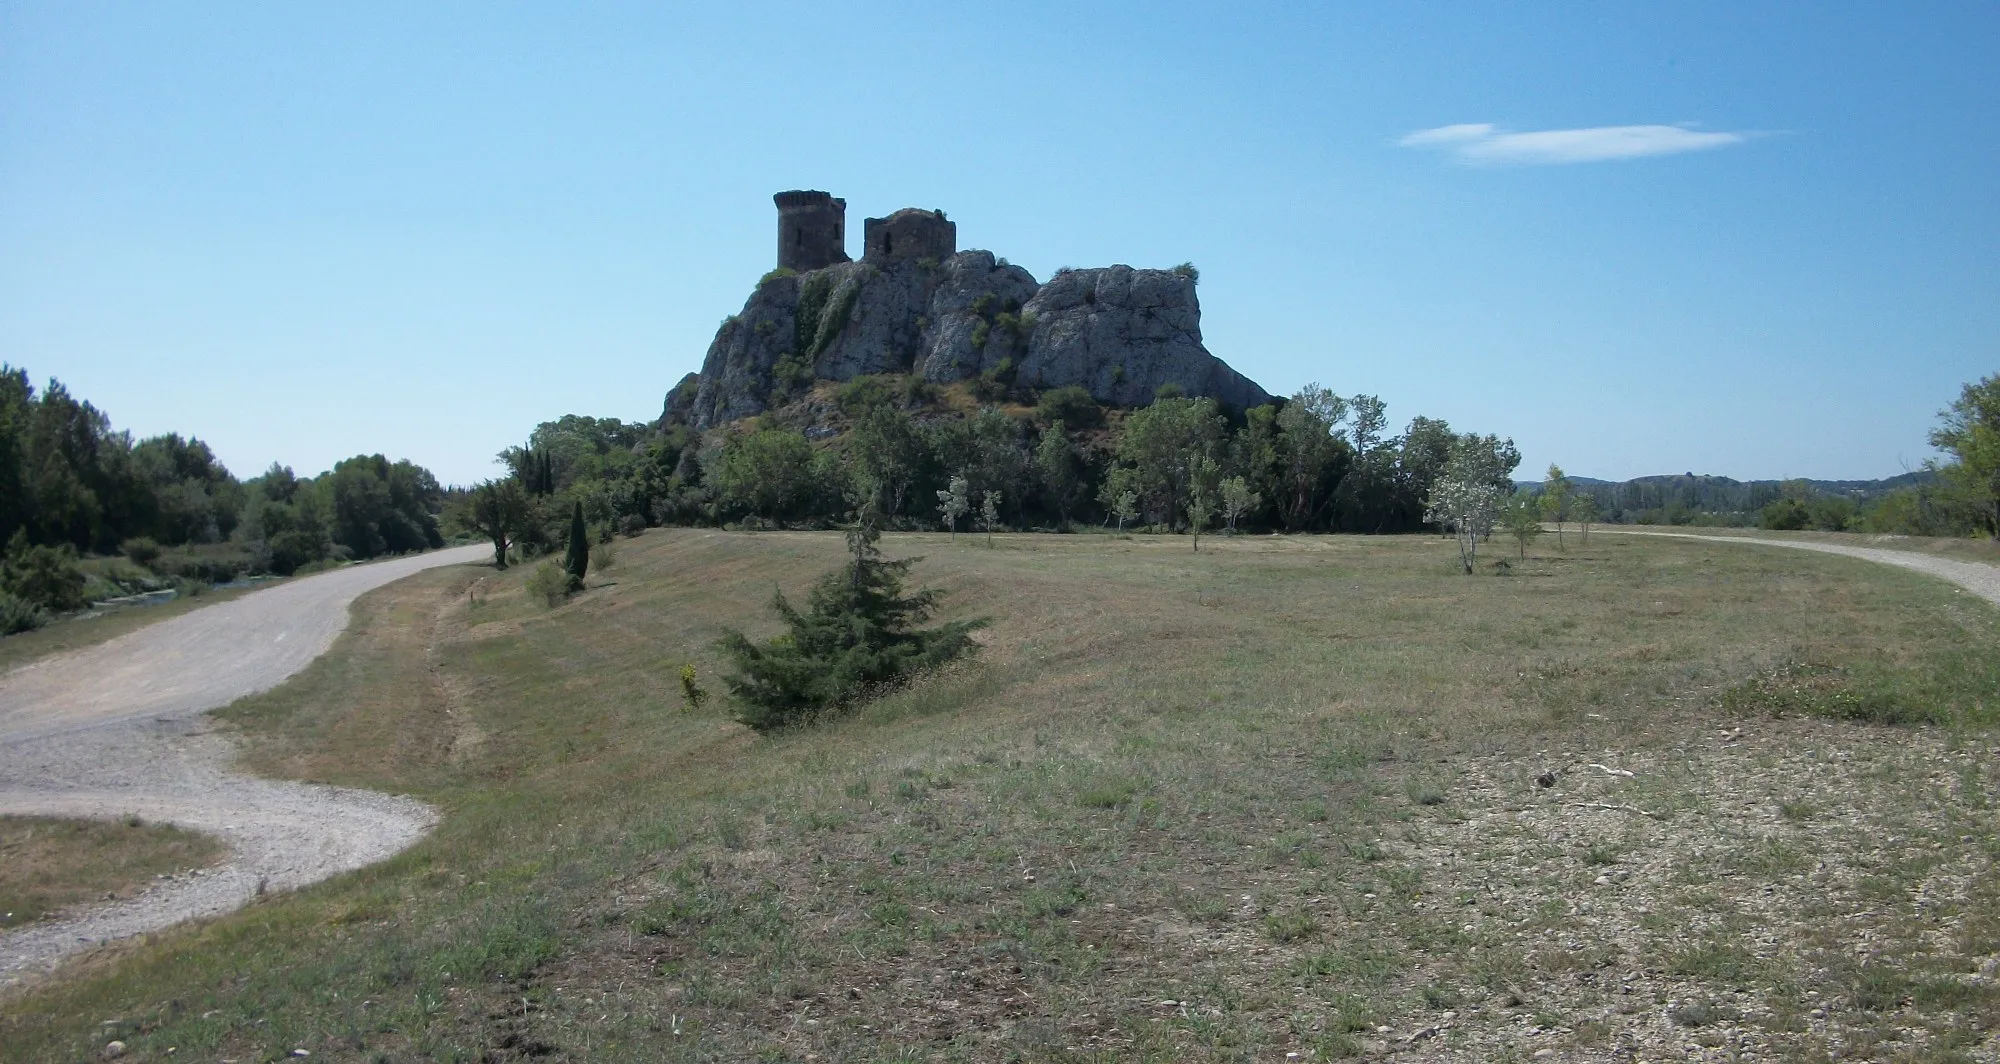 Photo showing: Hers Tower (Tour de l'Hers), along the Rhône river in Châteauneuf-du-Pape (France), seen from north.